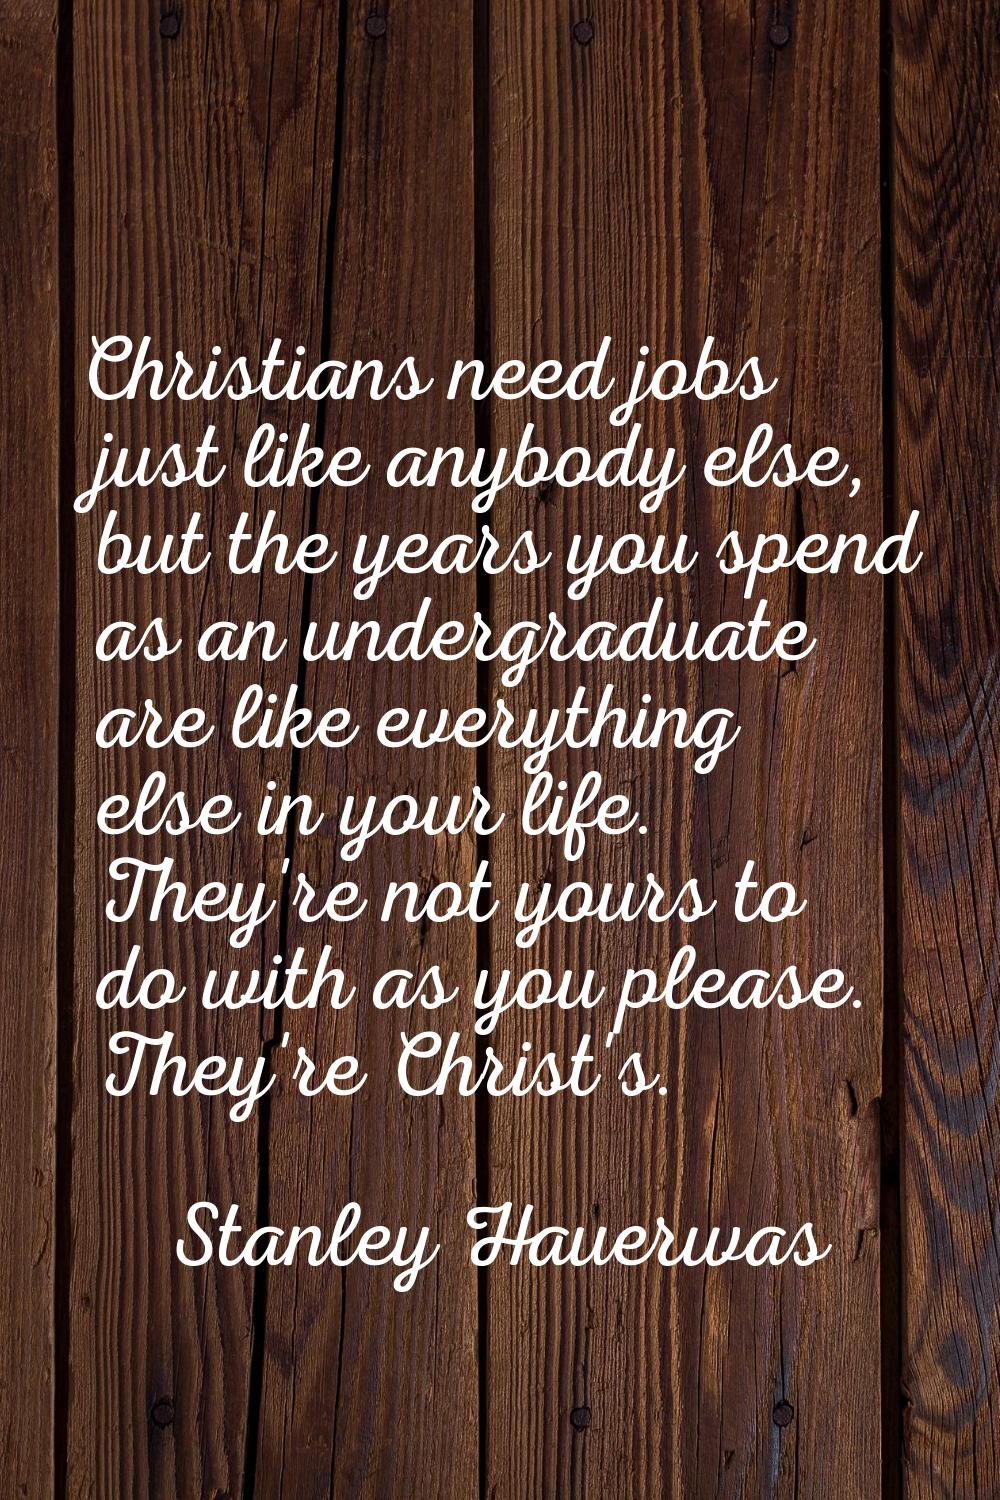 Christians need jobs just like anybody else, but the years you spend as an undergraduate are like e